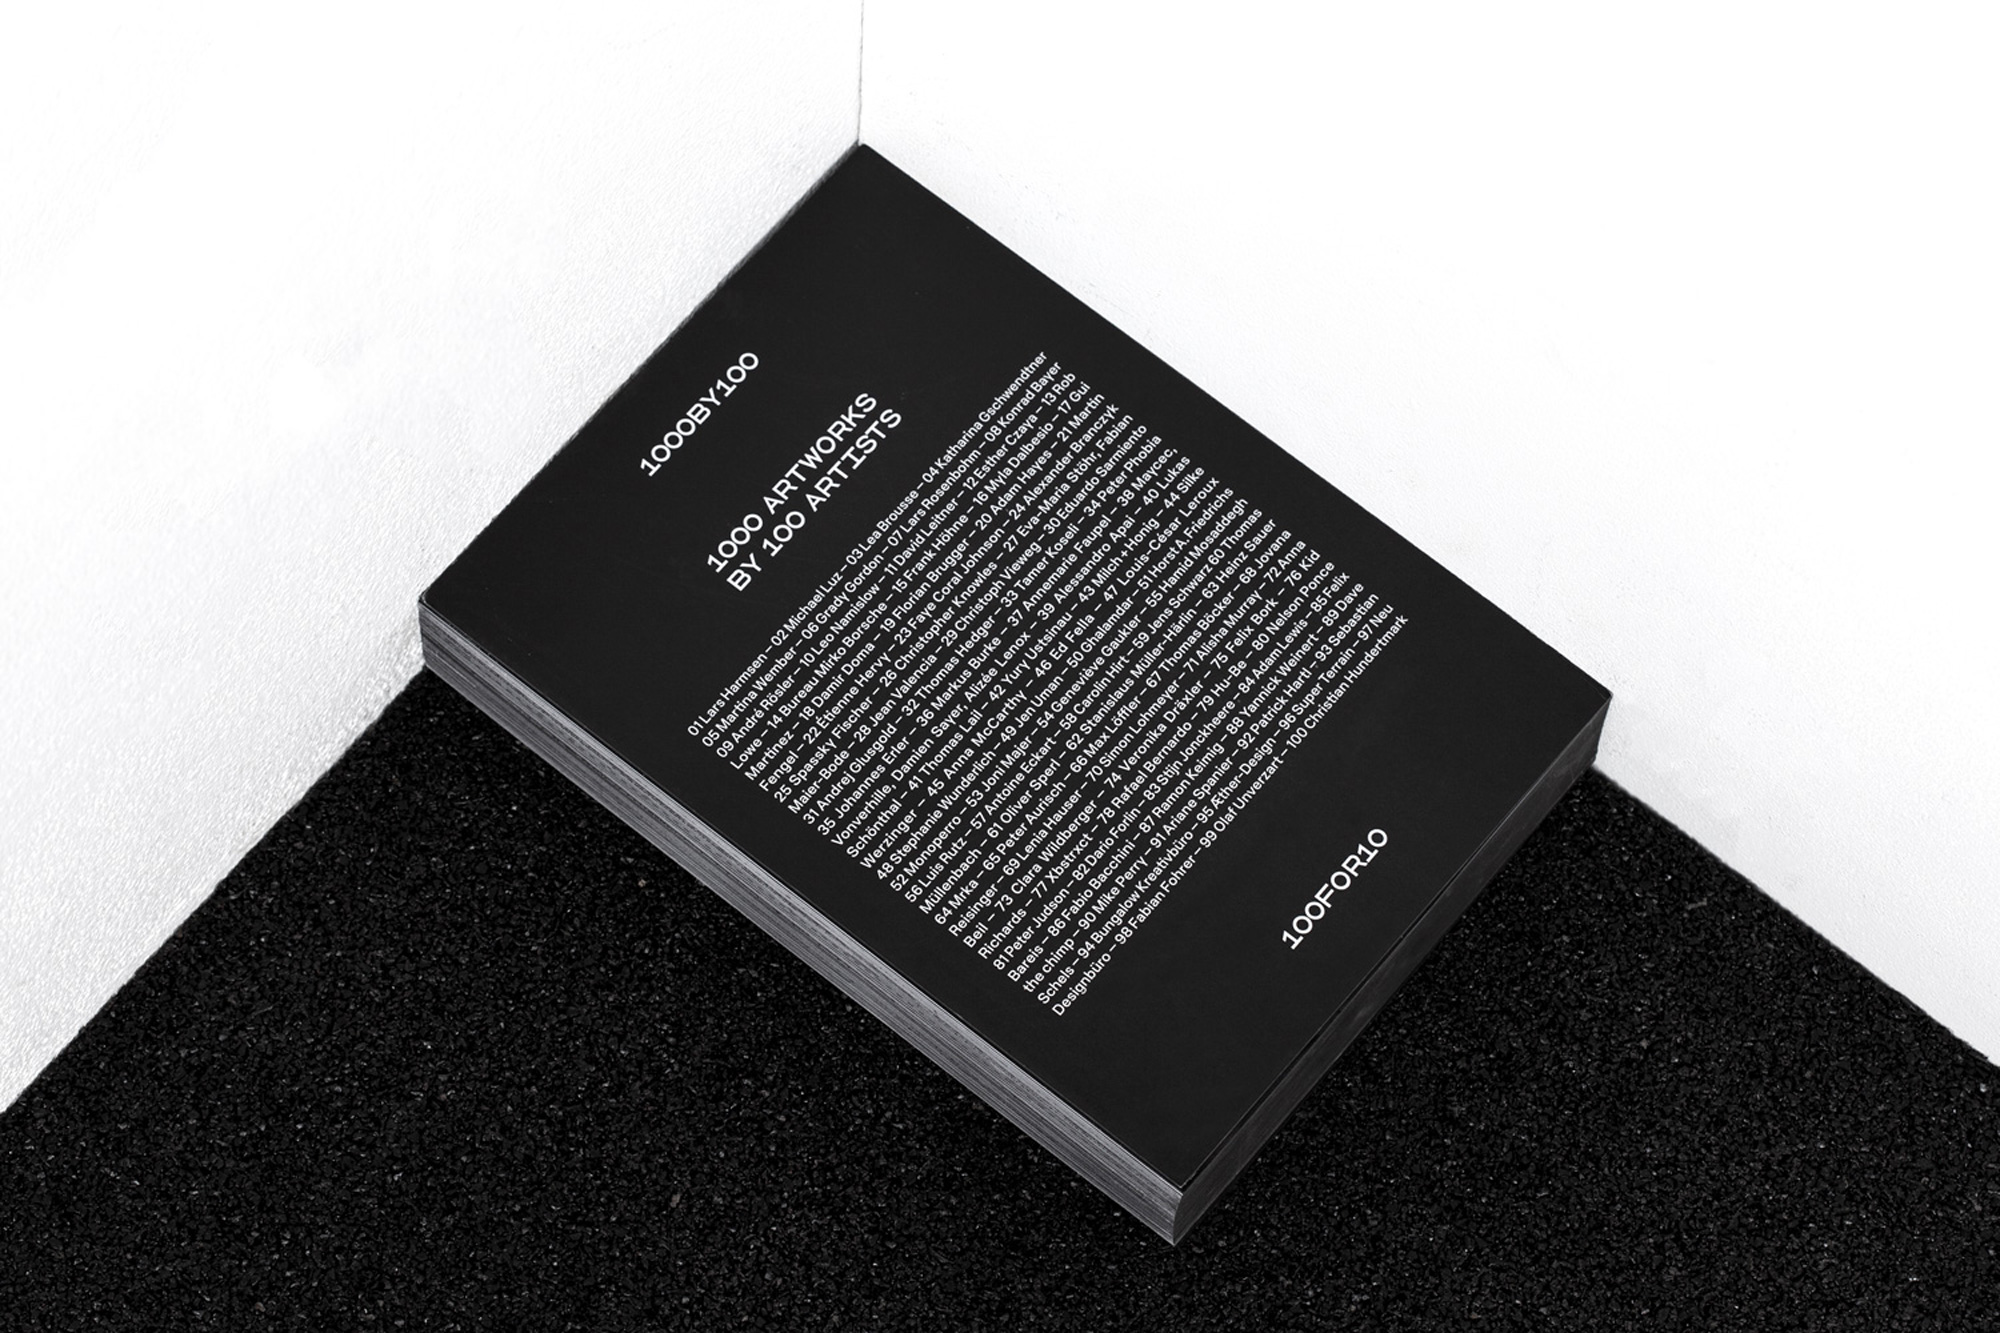 InesJung-1000by100-book-design-editorial-special-edition-09